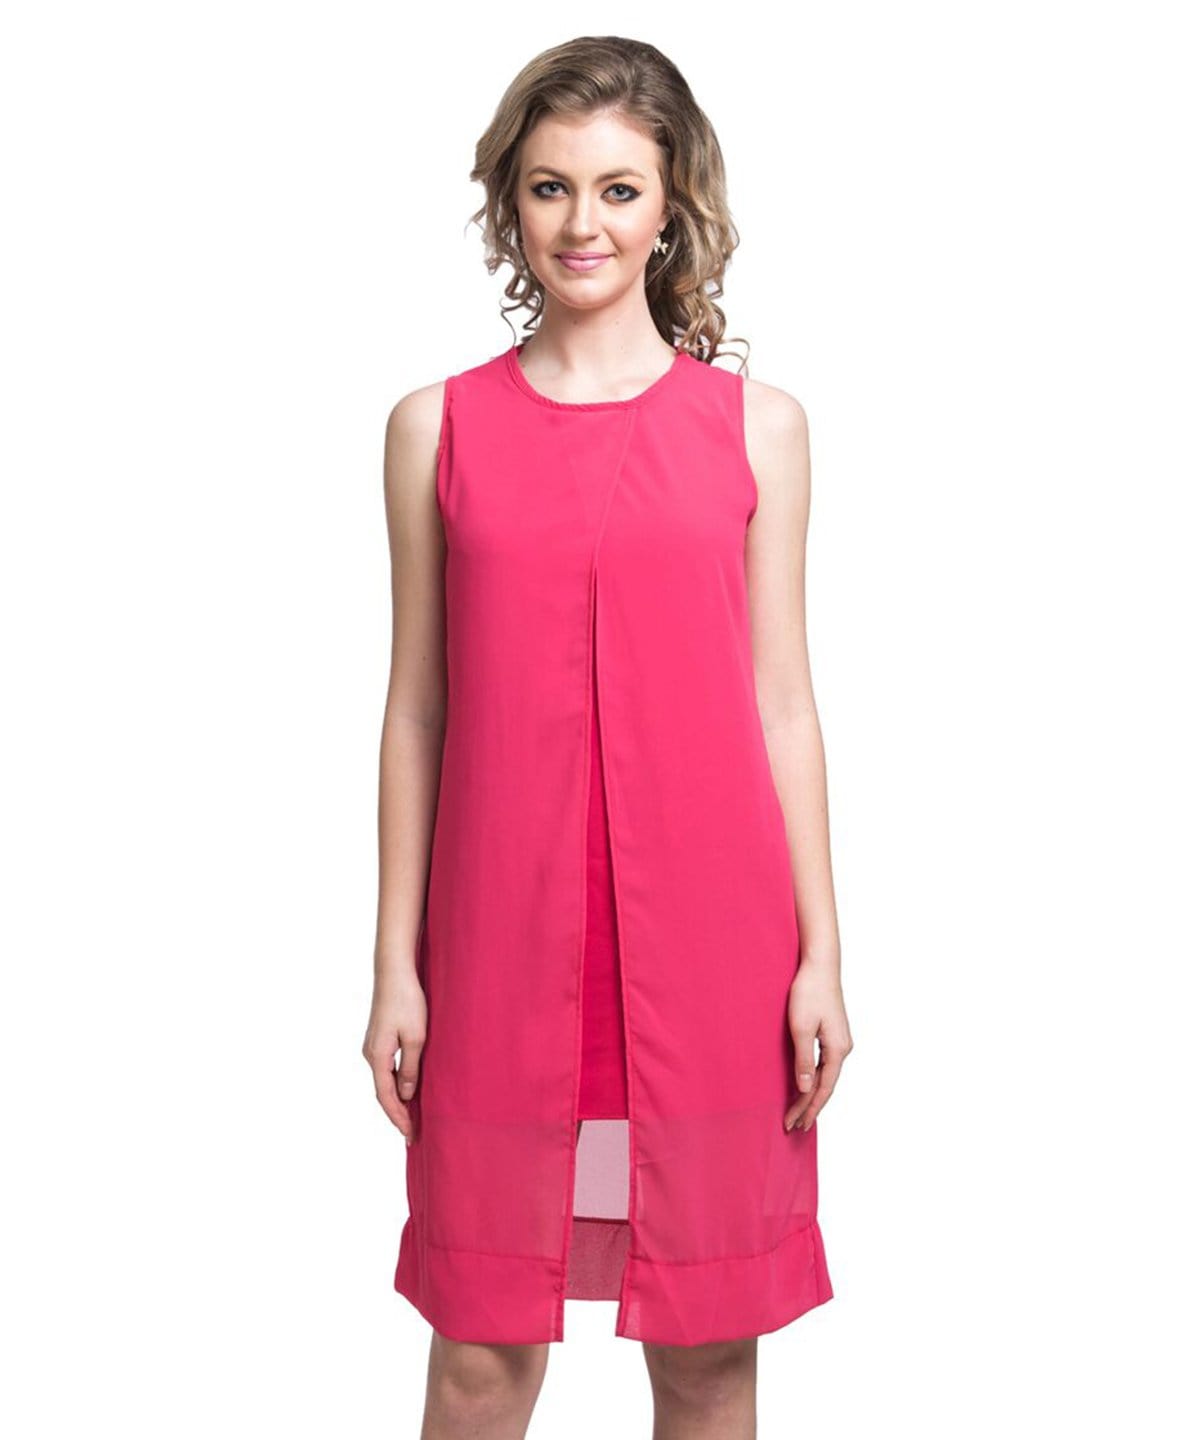 Solid Pink Casual Dress/Tunic - Uptownie